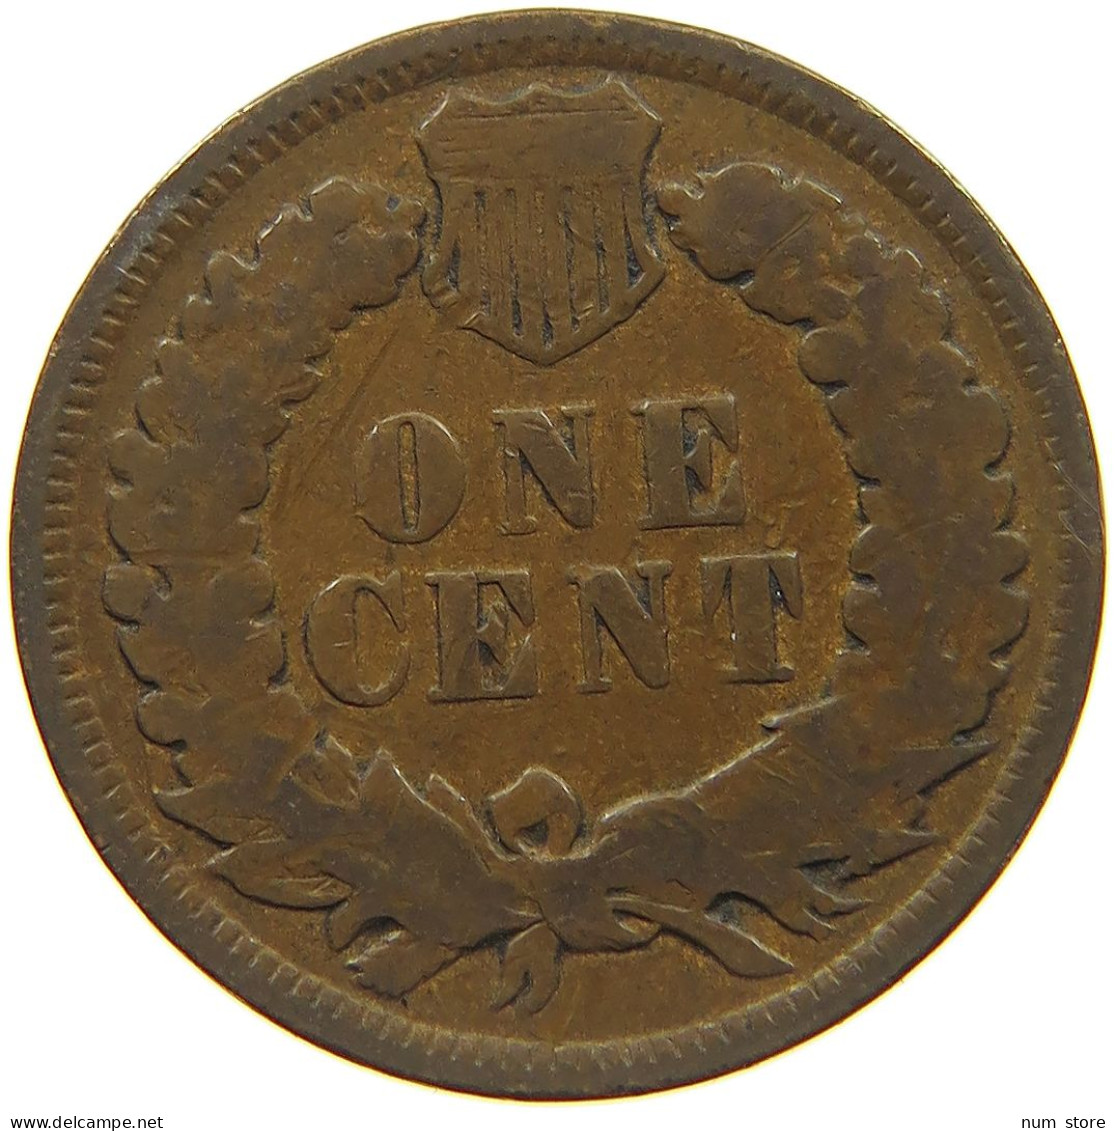 UNITED STATES OF AMERICA CENT 1898 INDIAN HEAD #c012 0107 - 1859-1909: Indian Head